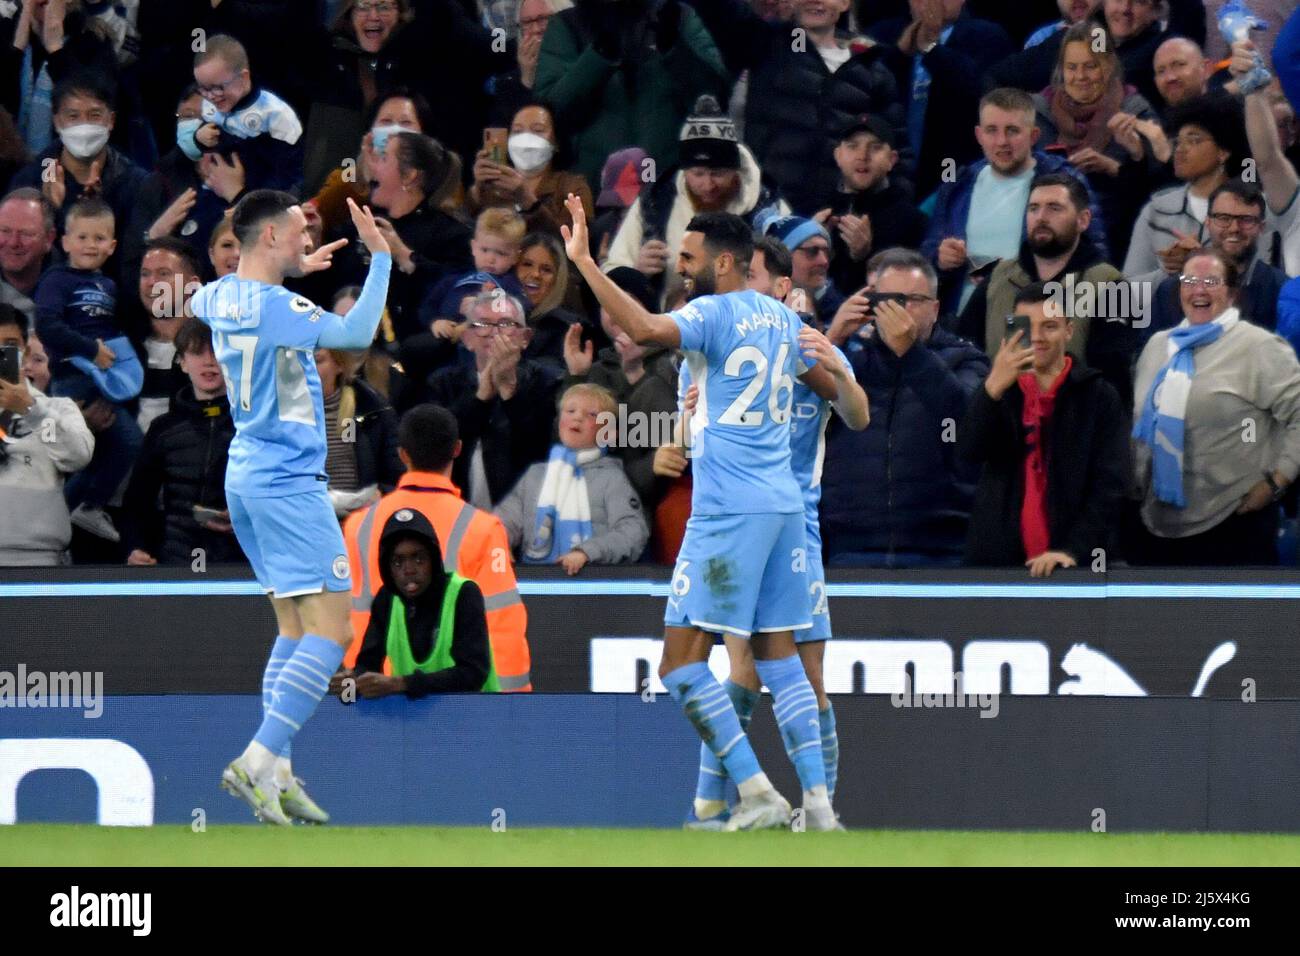 Manchester City's Riyad Mahrez celebrates scoring his side's first goal of the game. Picture date: Thursday April 21, 2022. Photo credit should read:   Anthony Devlin/Alamy Live News/Alamy Live News Stock Photo